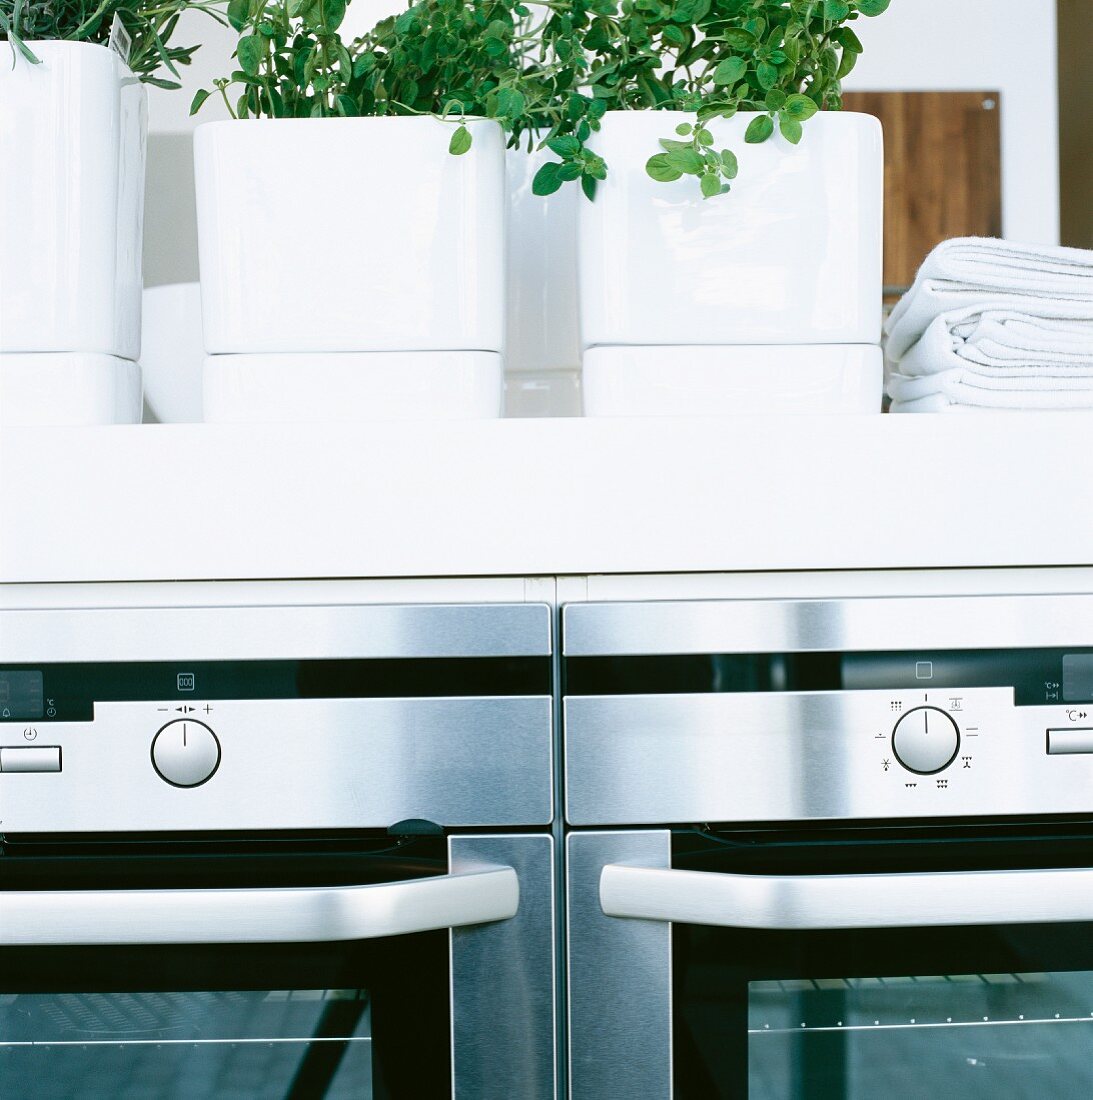 Herb pots on a kitchen counter with built-in kitchen appliance